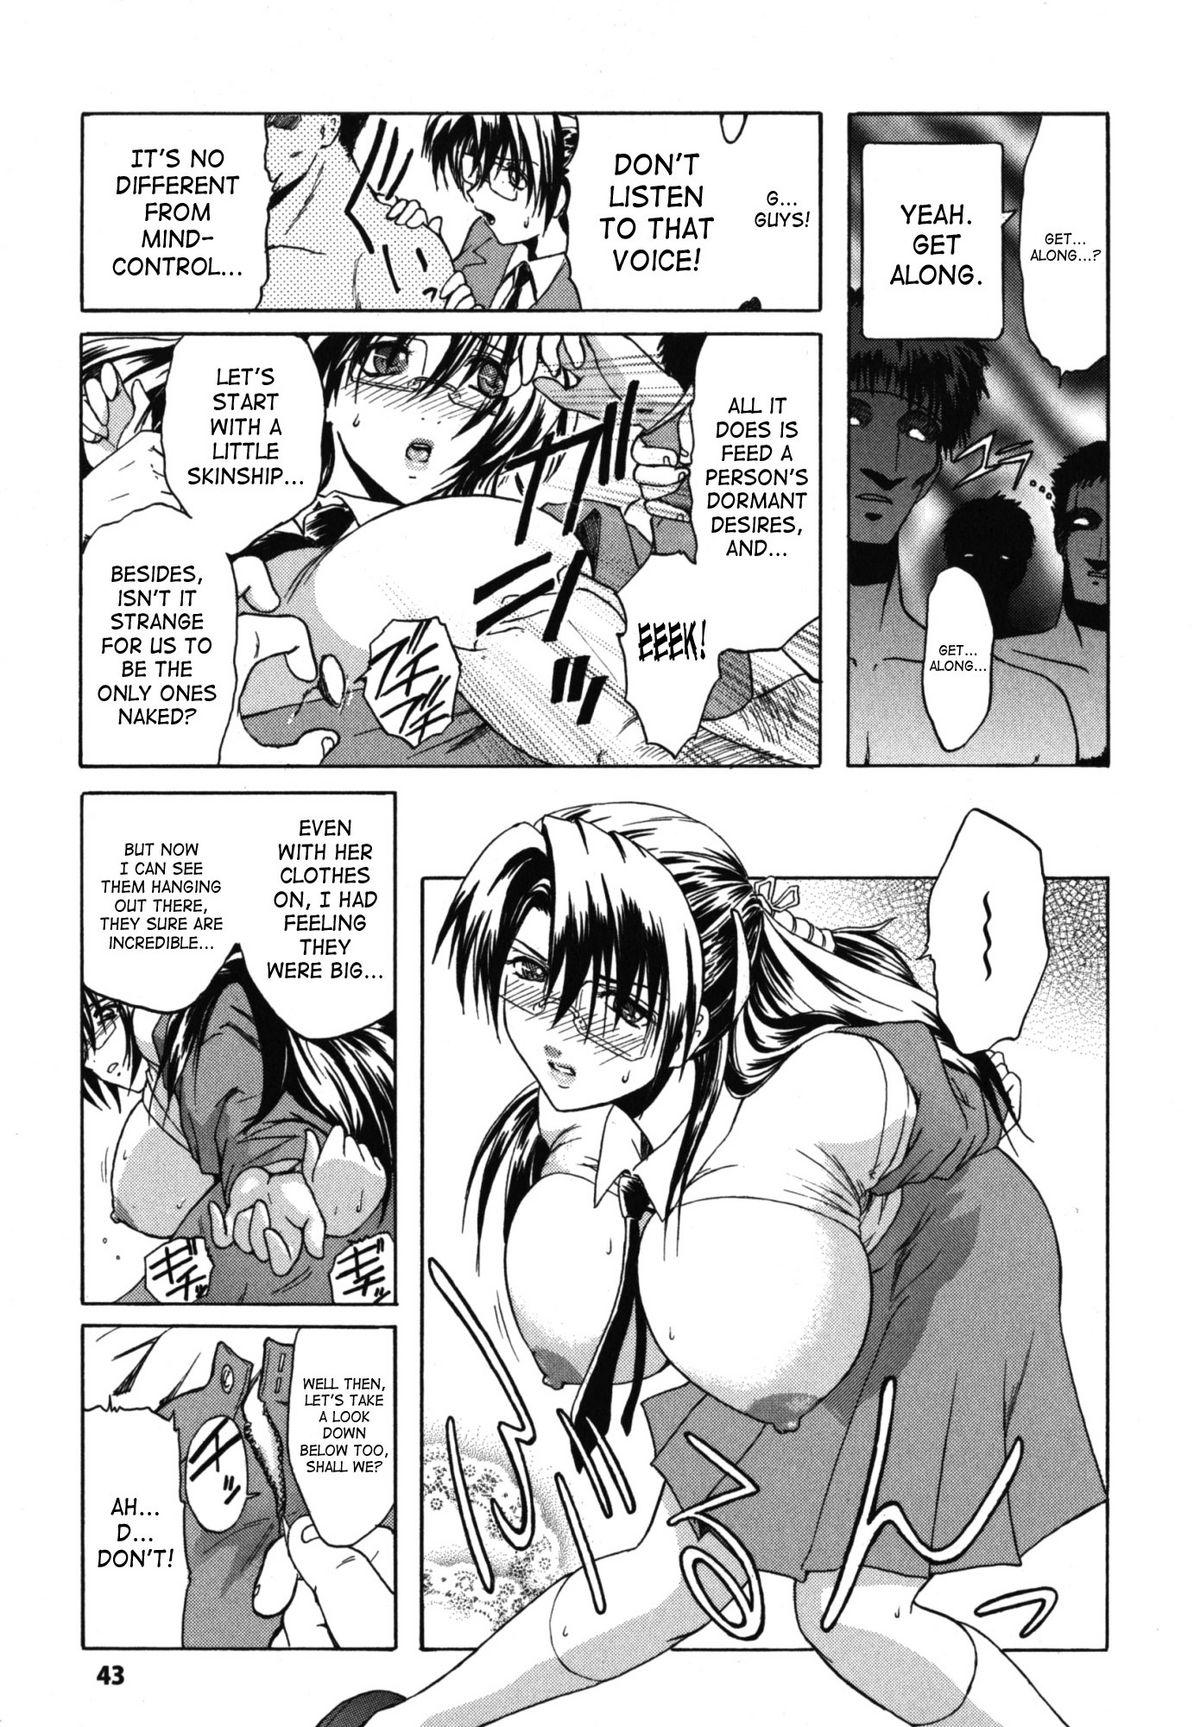 Kabe no Naka no Tenshi Jou | The Angel Within The Barrier Vol. 1 44